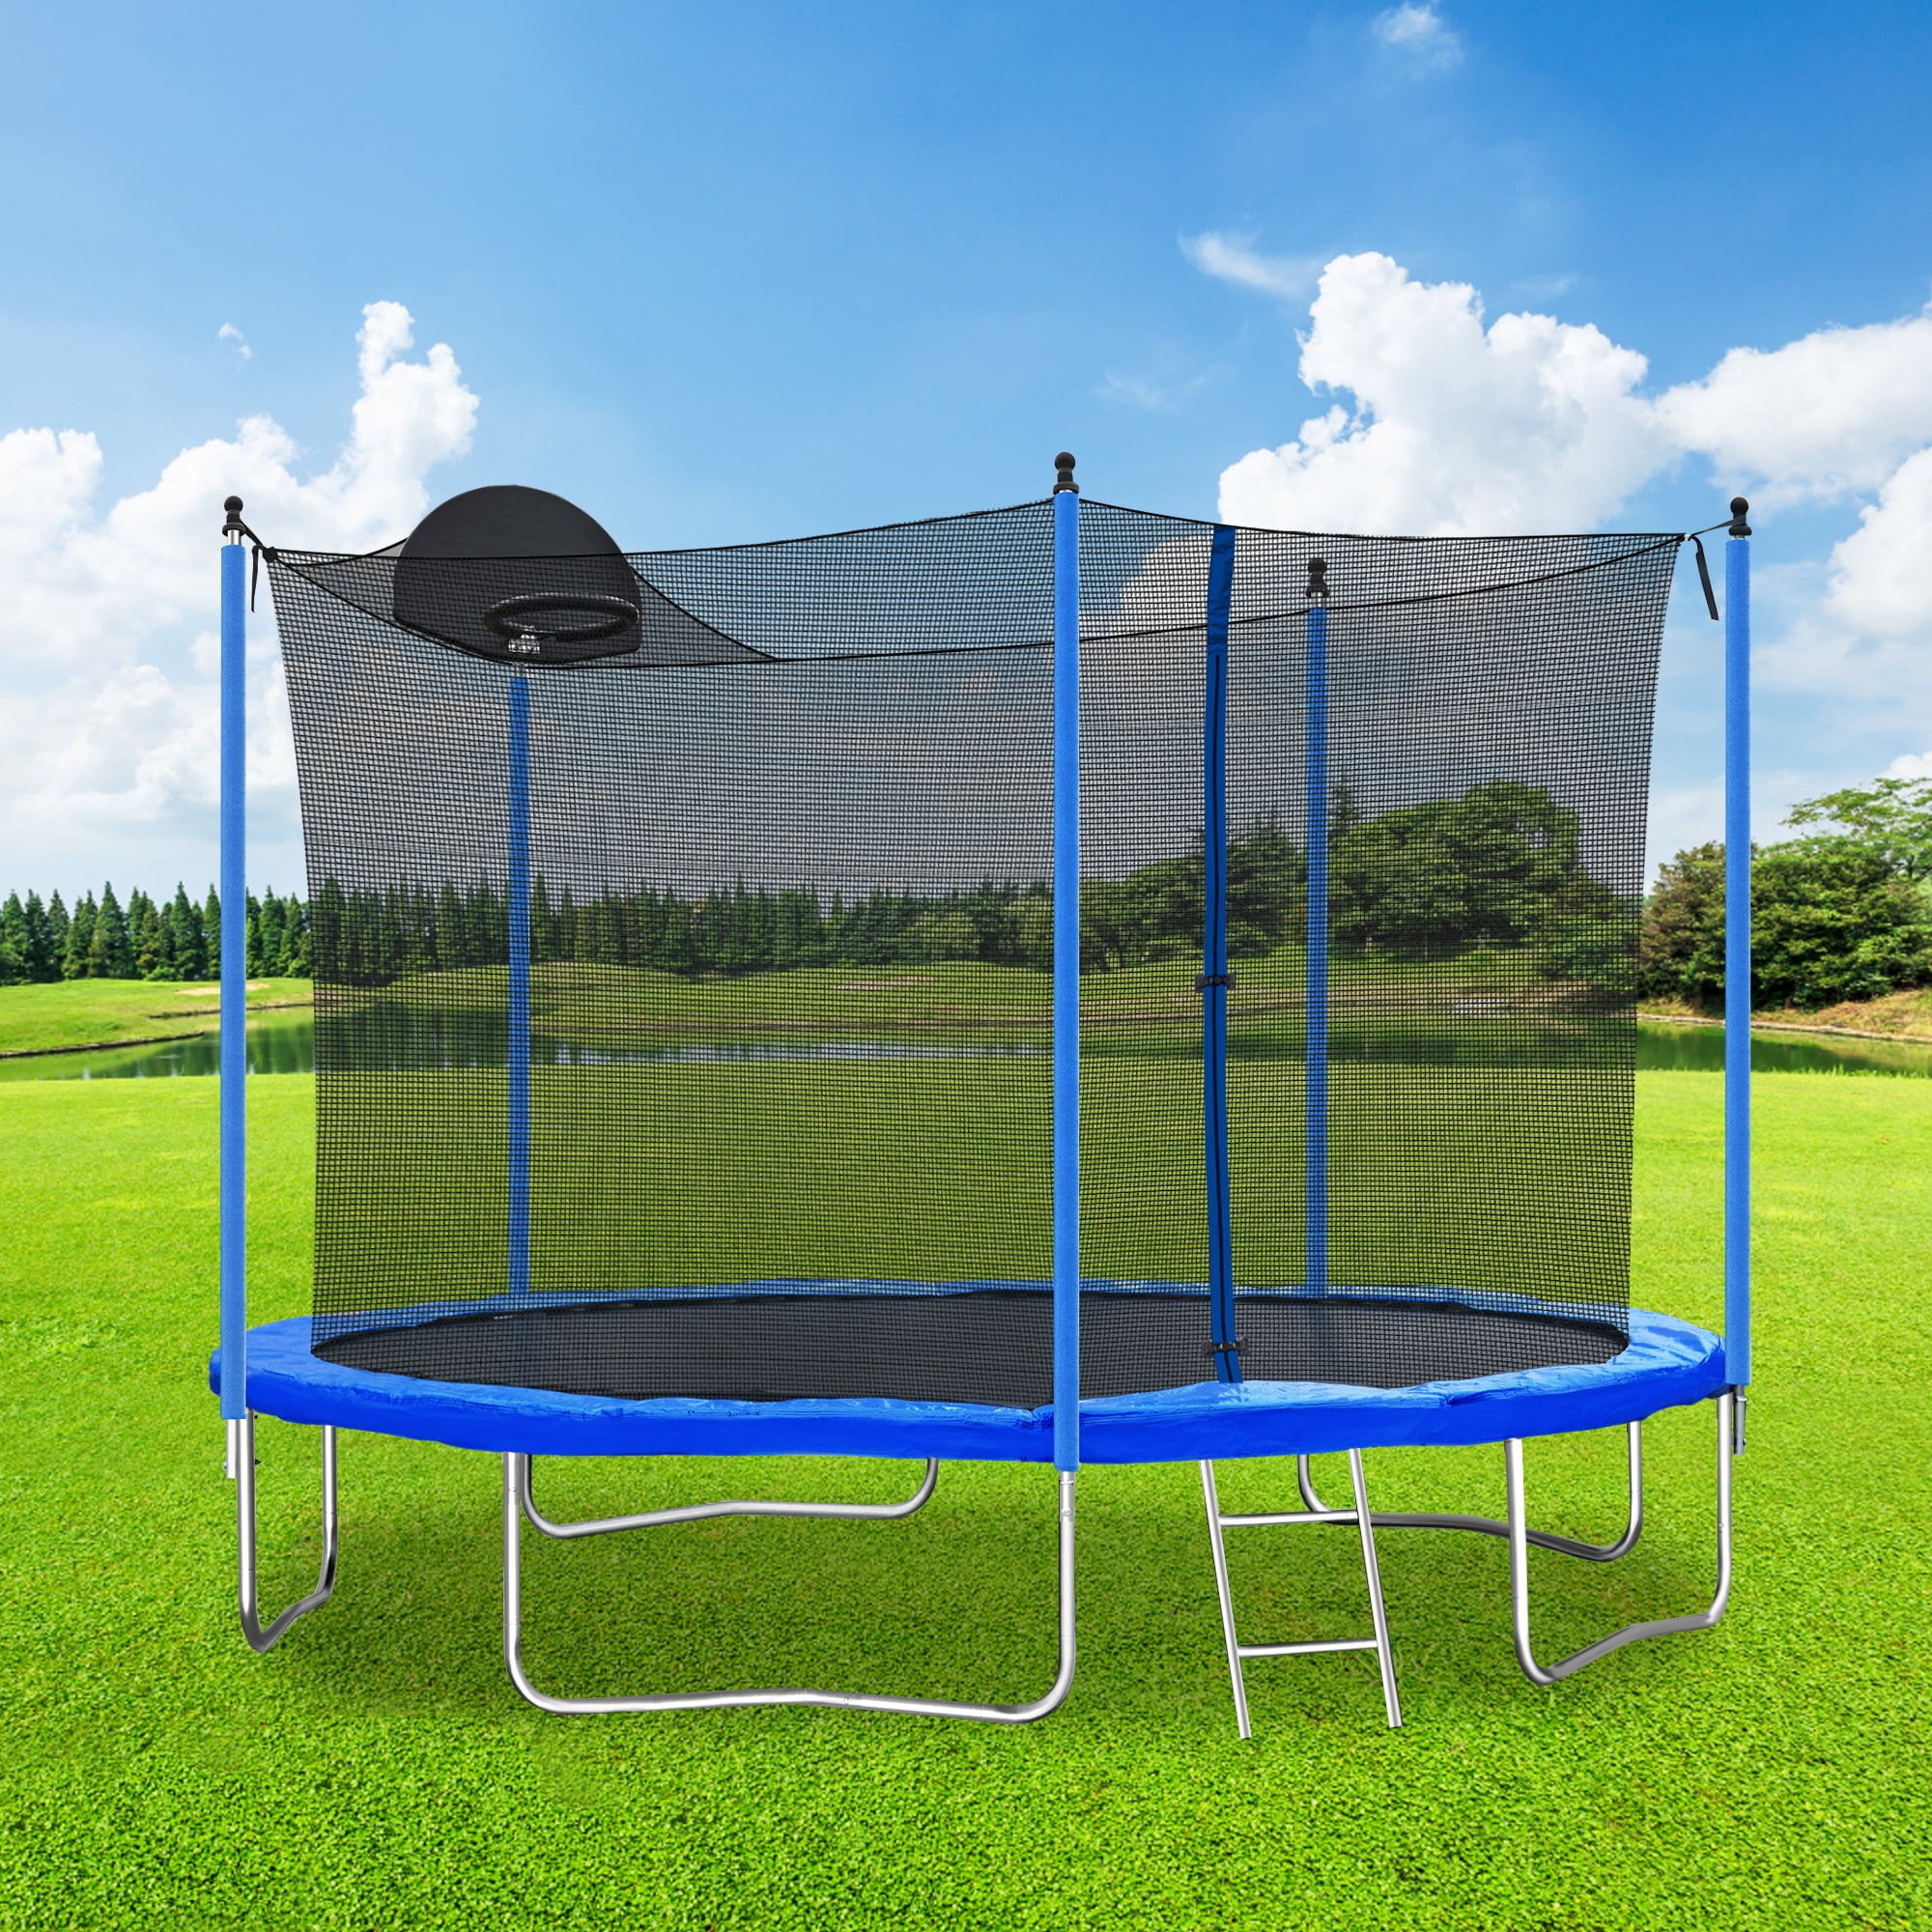 uhomepro 12-Foot Kids Trampoline for Backyard, Outdoor with Board, Safety Enclosure Net, Steel Tube, Circular Trampolines for Adults Kids, Family Jumping and Ladder, Kids Round Trampoline Walmart.com